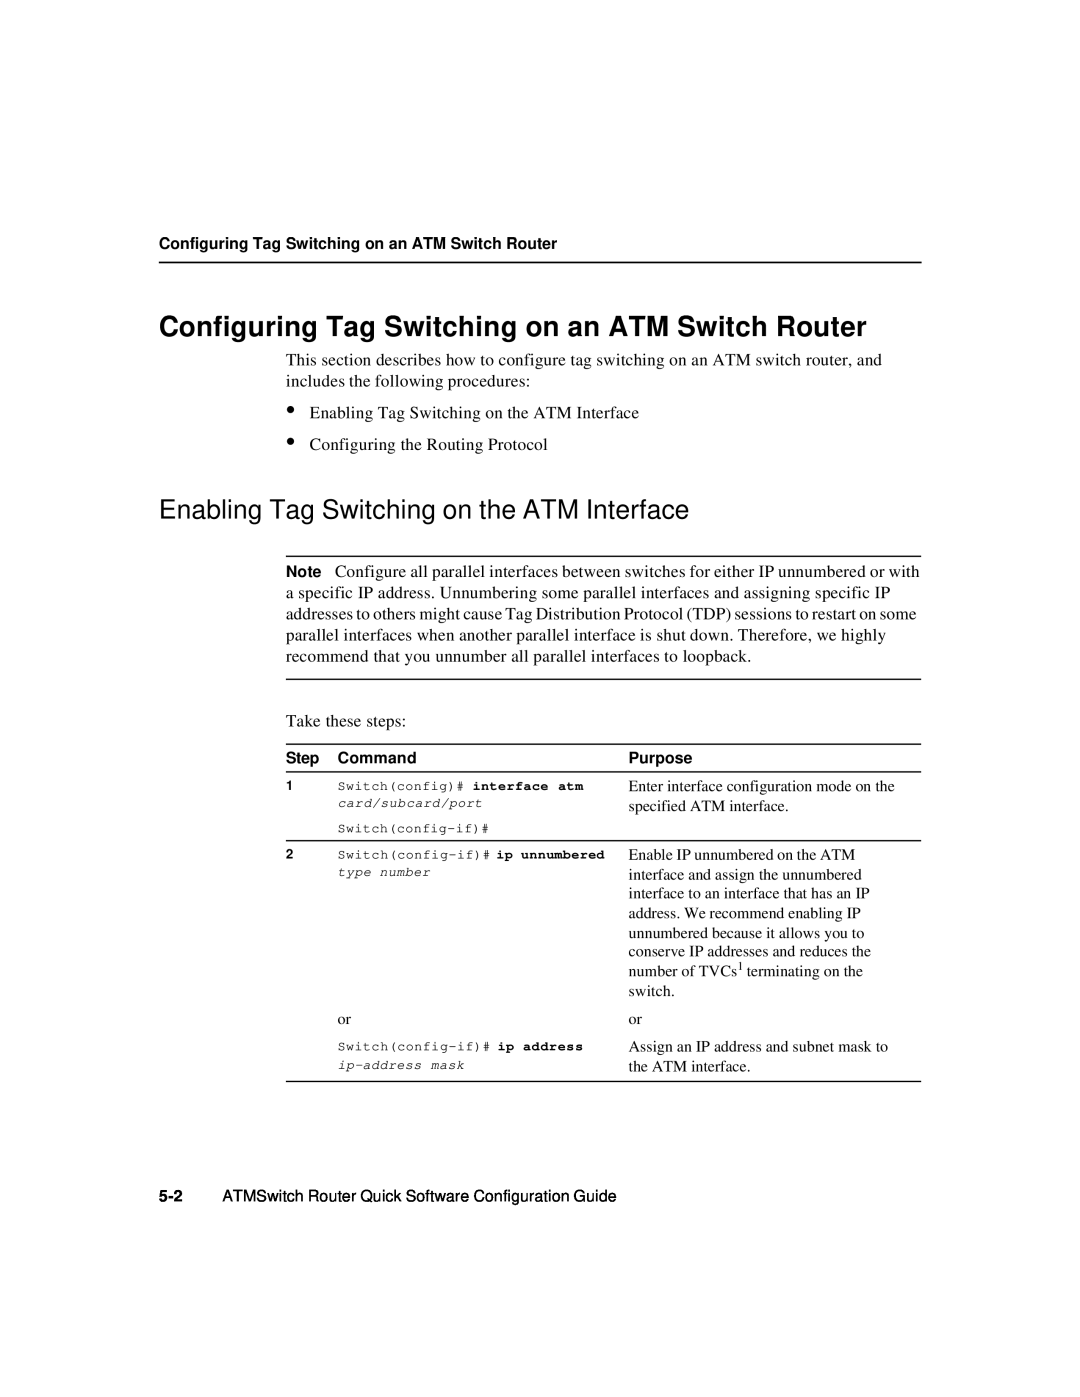 Cisco Systems 78-6897-01 Configuring Tag Switching on an ATM Switch Router, Enabling Tag Switching on the ATM Interface 